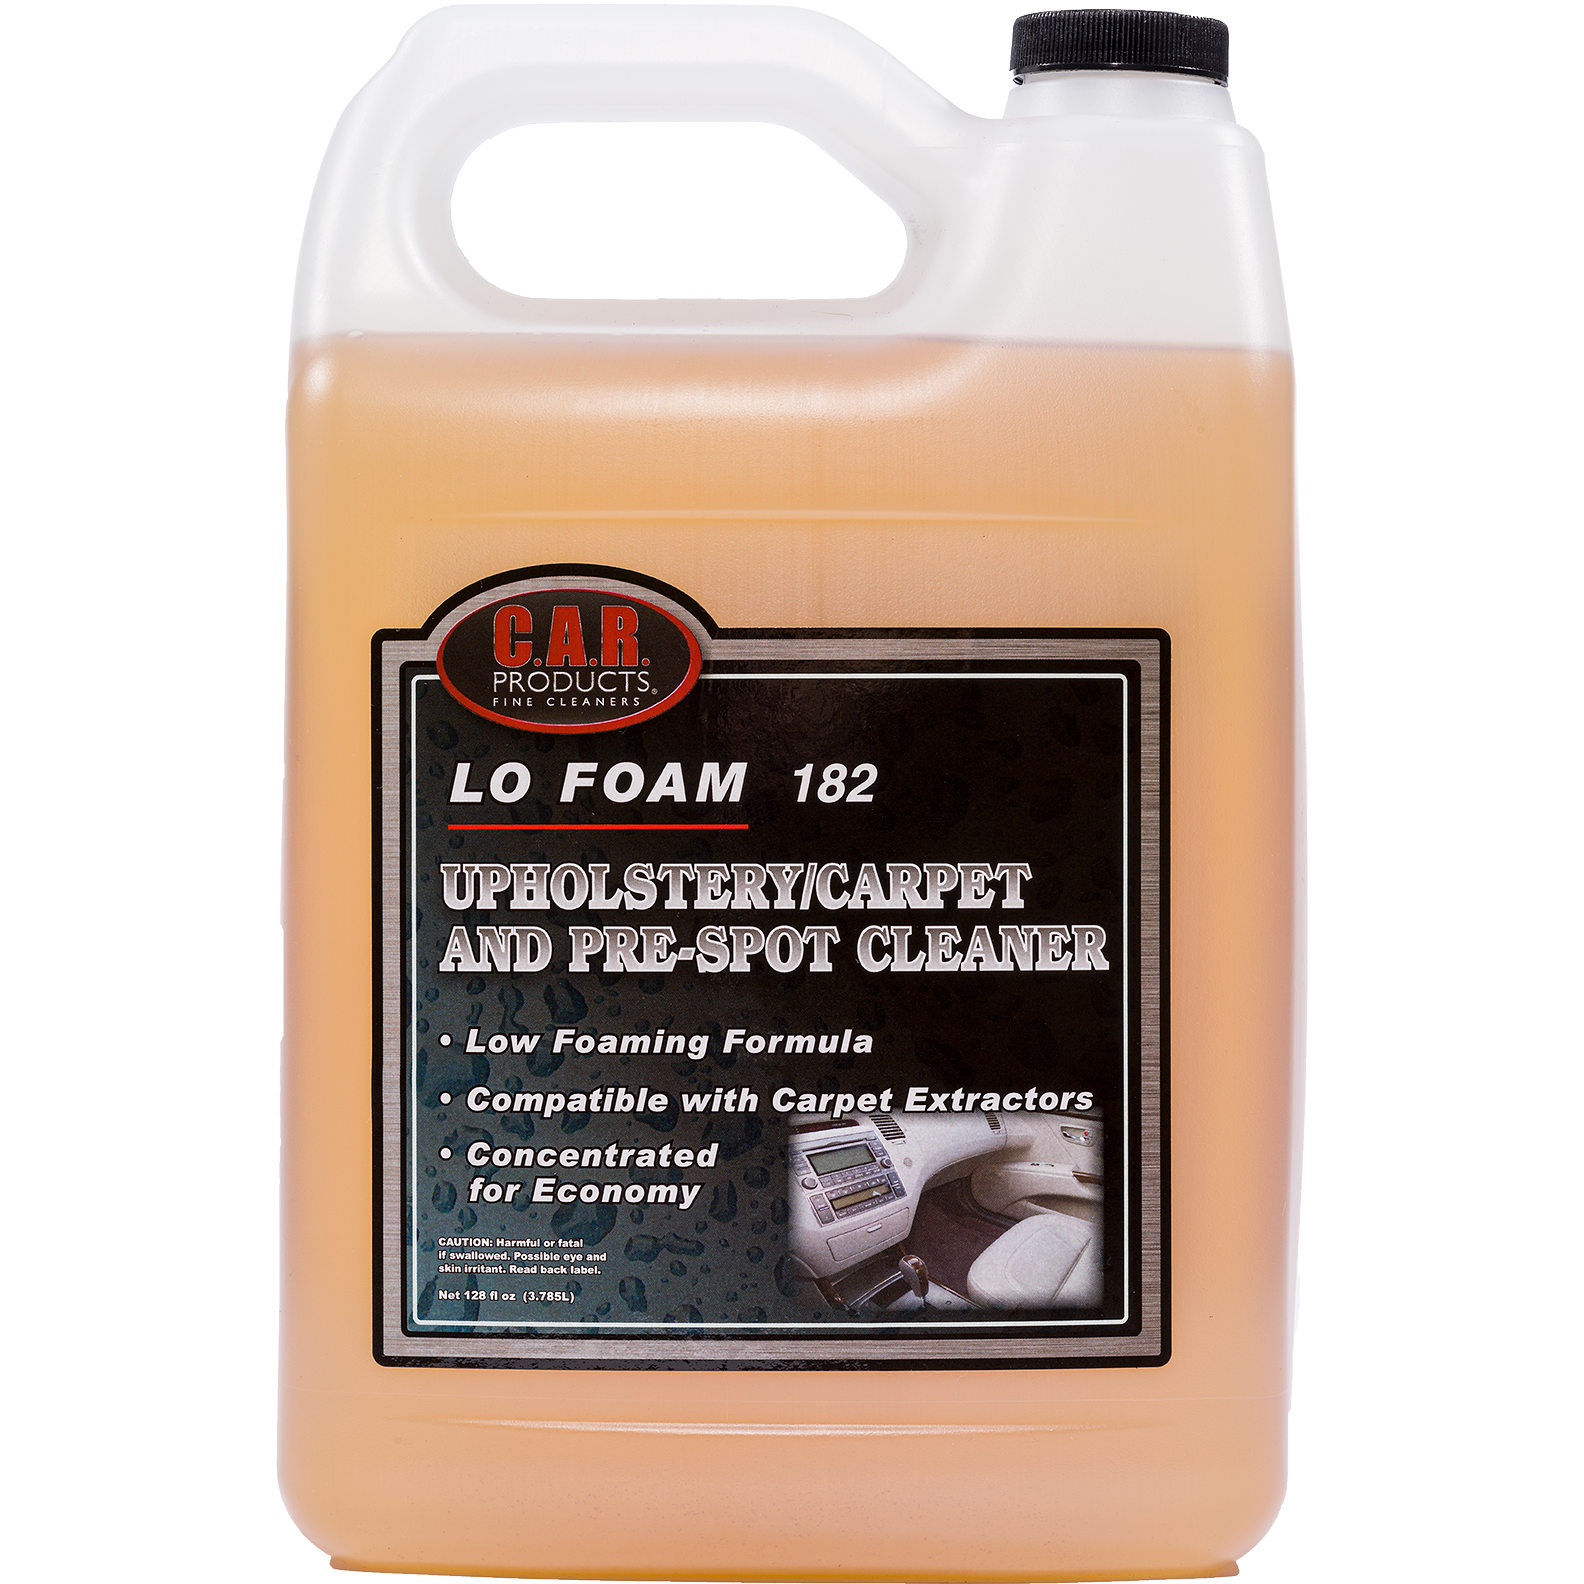 XCP CAR-18201 CAR Products Lo Foam Upholstery/Carpet & Pre-Spot Cleaner (1 gal)